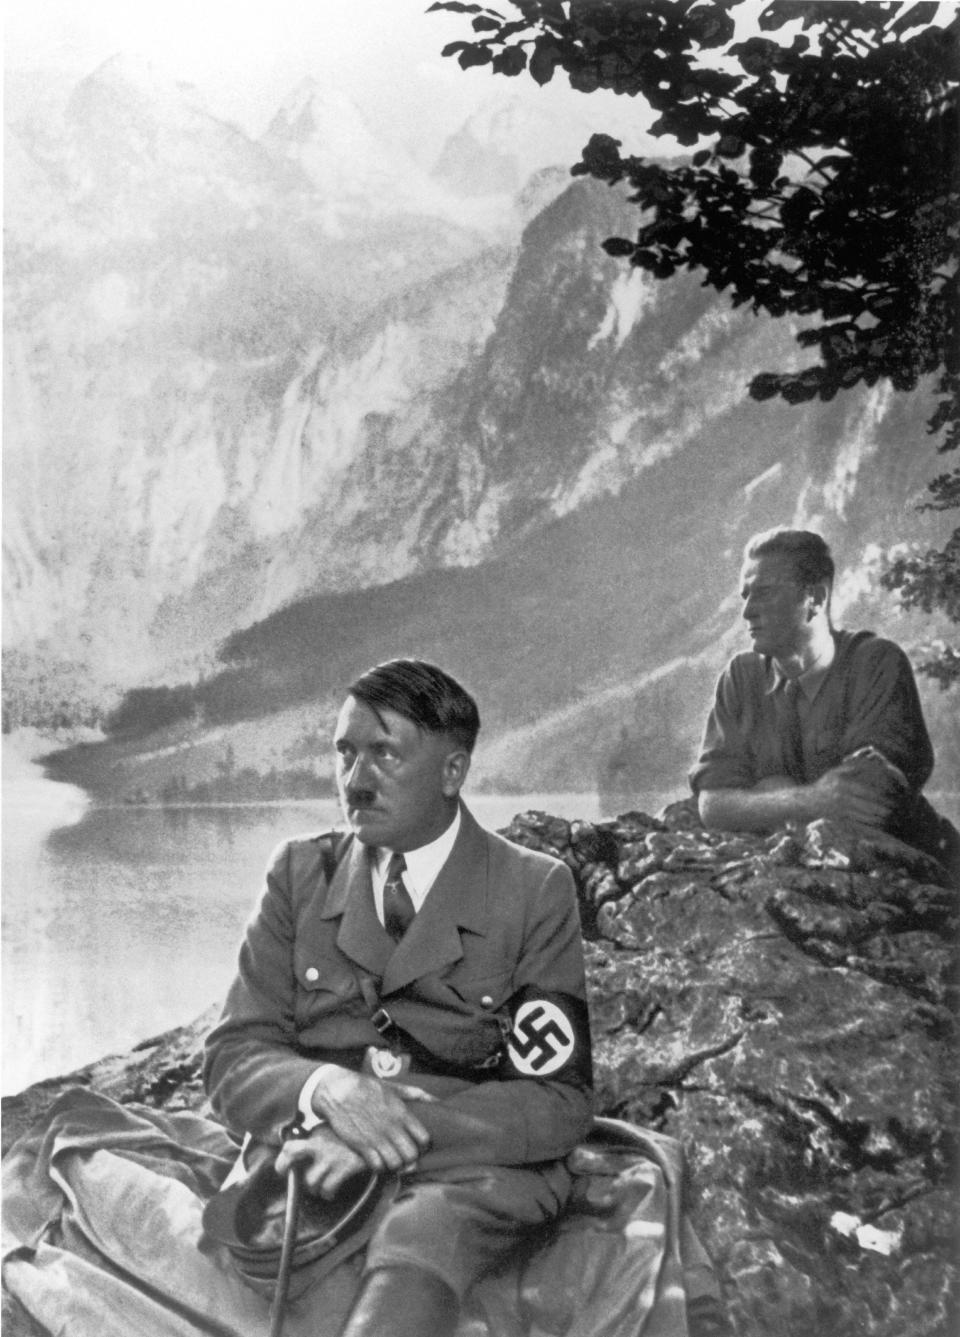 GERMANY - JANUARY 01:  Adolf HITLER posing on the banks of a lake near his chalet at Berchtesgaden, in the Bavarian Alps, in the 1930's.  (Photo by Keystone-France/Gamma-Keystone via Getty Images)